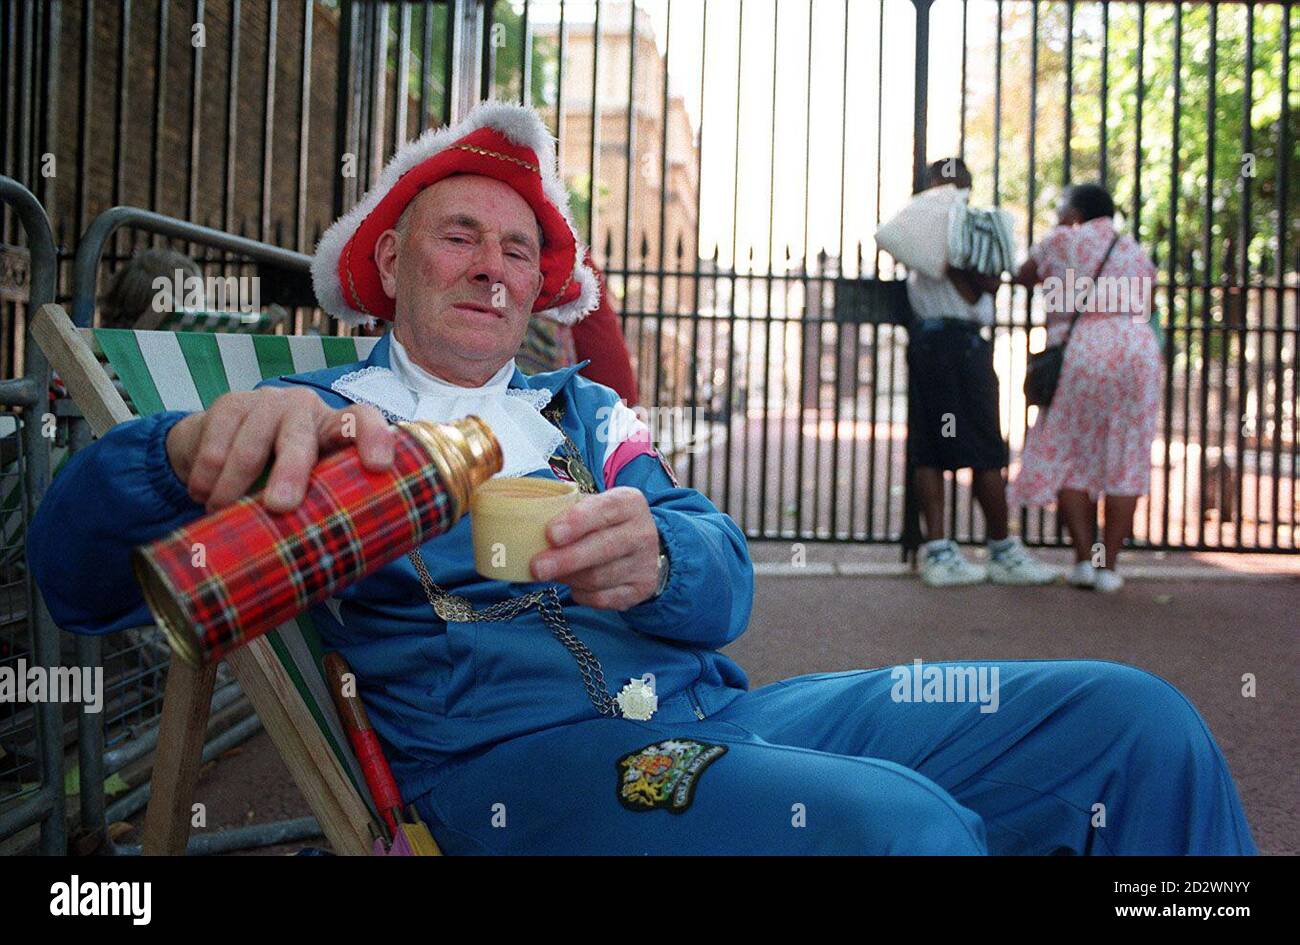 'Sir' Gary Baldi pours some tea from a flask after erecting his deck chair outside the gates of Clarence House in London today (Thur) in the hope of glimpsing the Queen Mother during her 95th birthday celebrations tomorrow (Fri). Mr Baldi, from Wandsworth, London, joined several other Royal watchers camped outside the gates ahead of Friday's regal event. Stock Photo